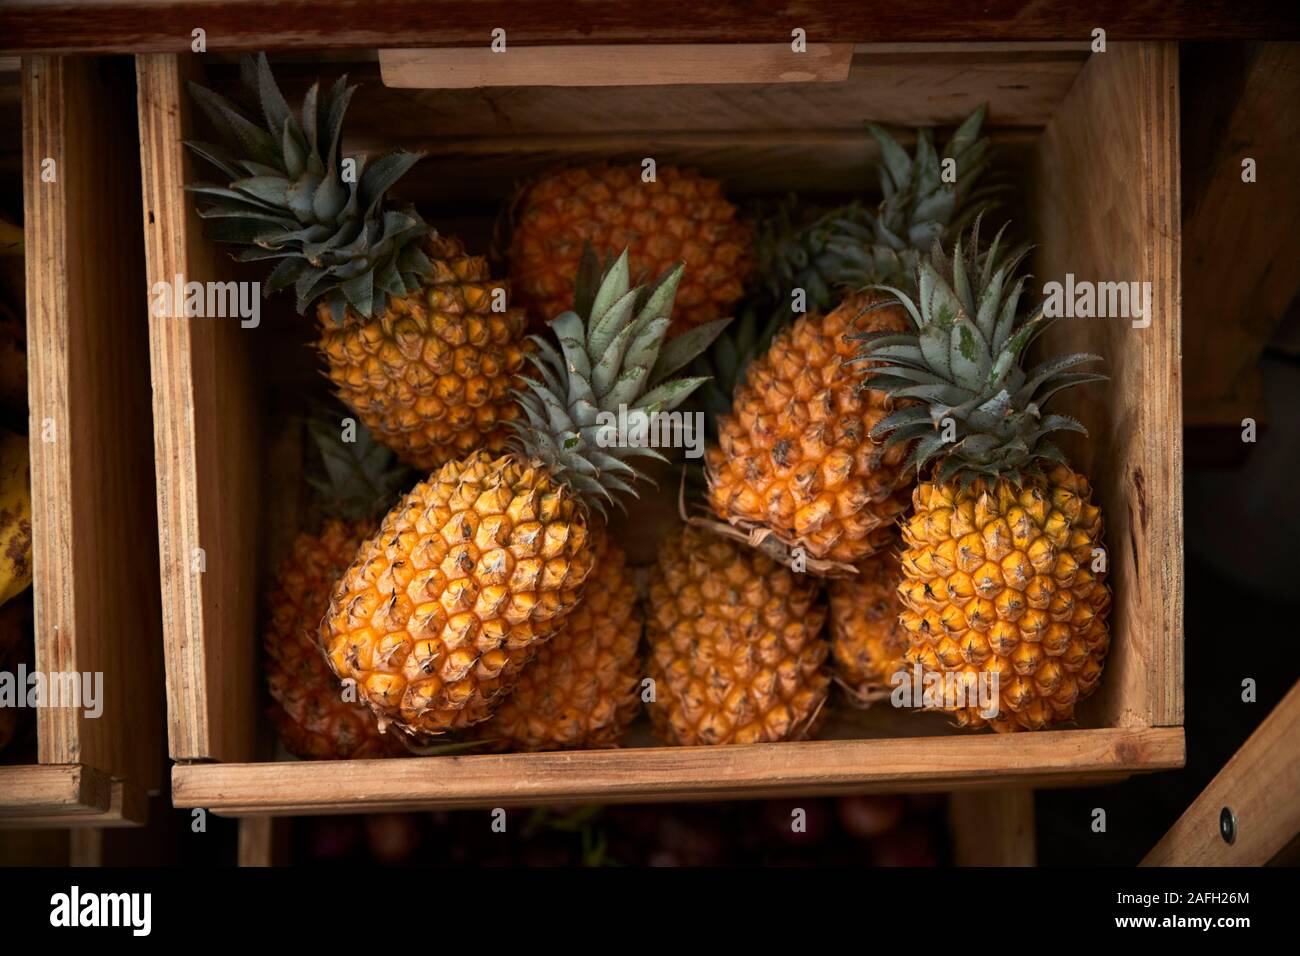 Display Of Pineapple In Sustainable Plastic Packaging Free Grocery Store Stock Photo